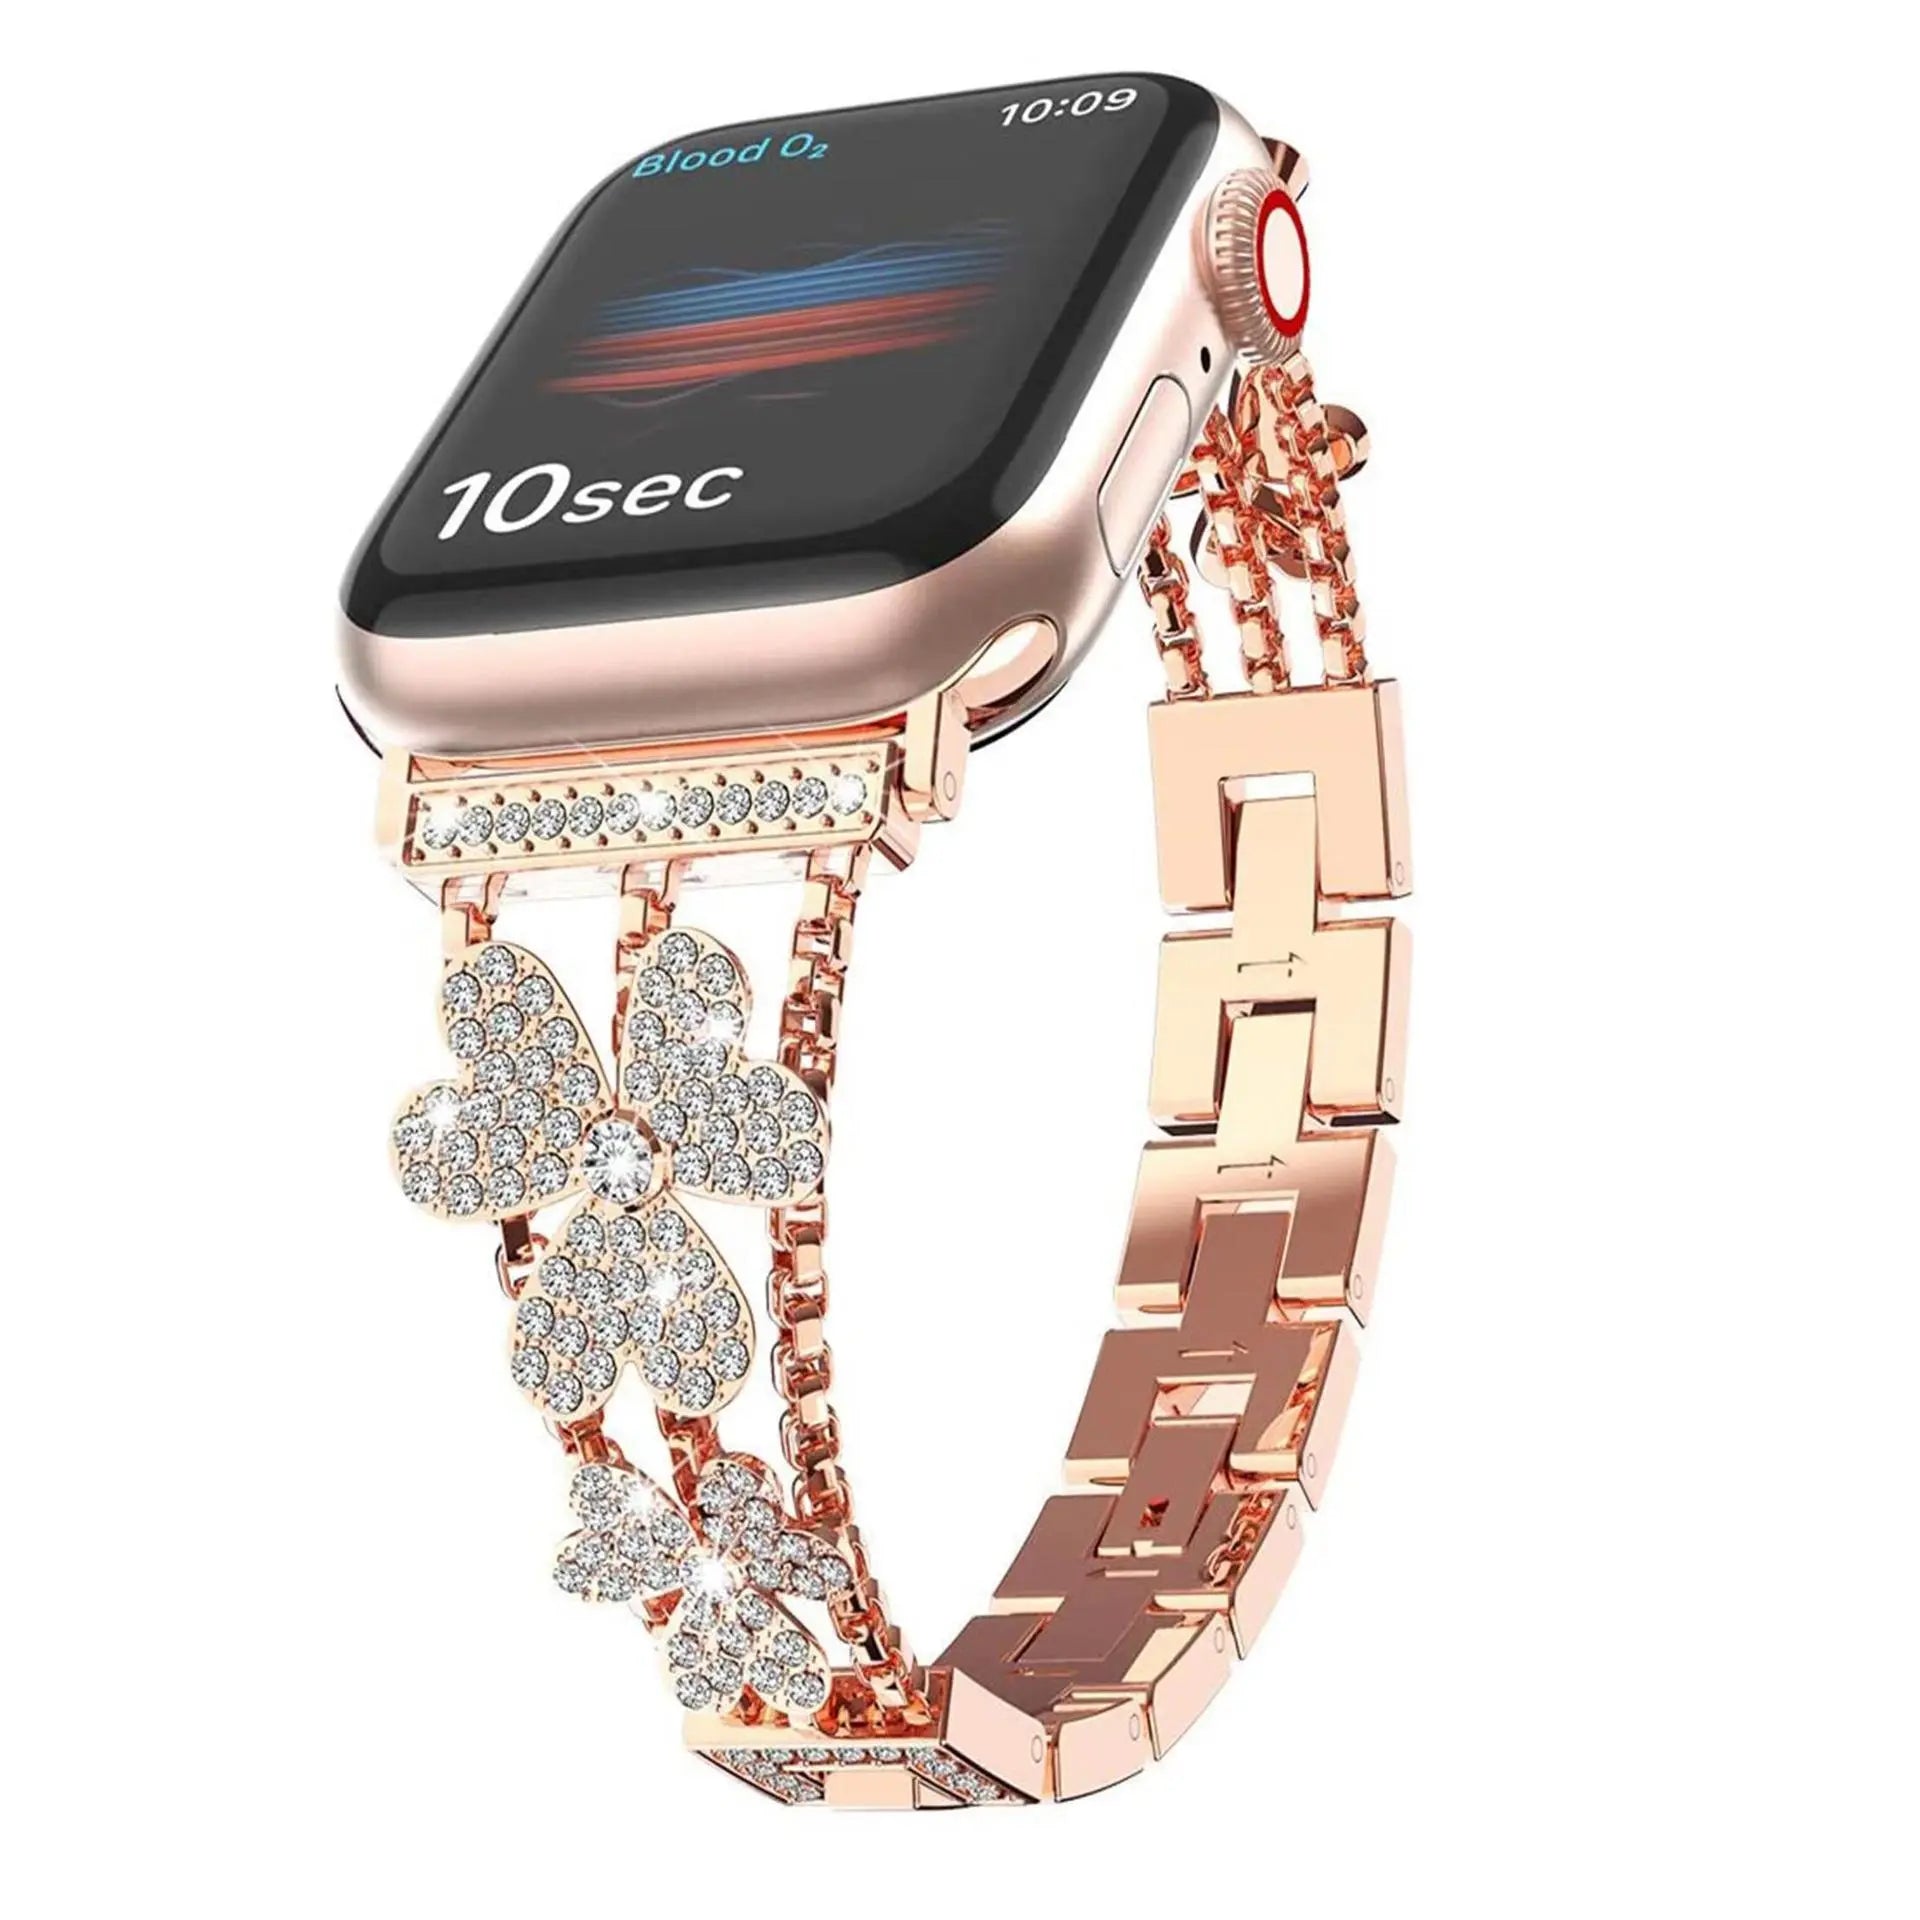 Floral Sparkle Stainless Steel Apple Watch Band